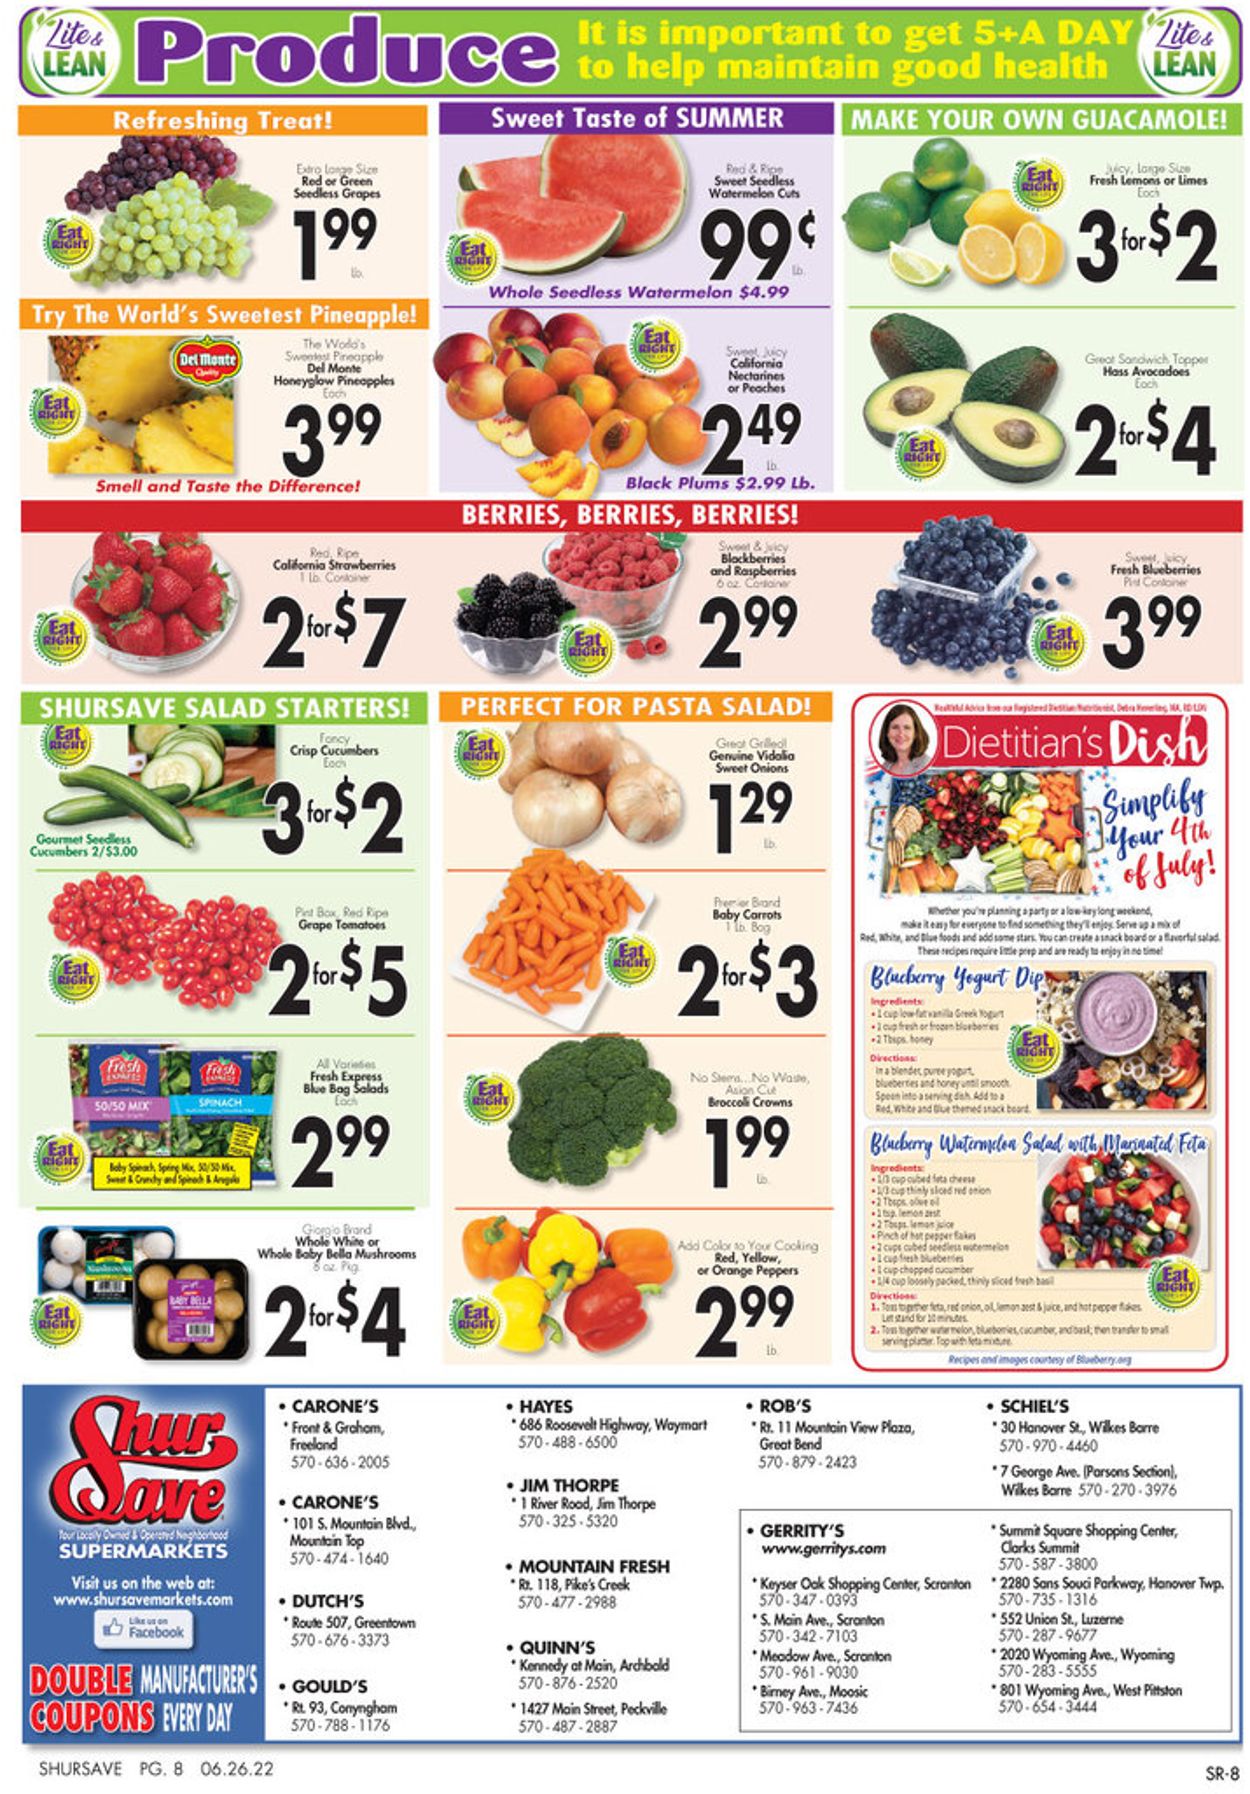 Catalogue Gerrity's Supermarkets - 4th of July Sale from 06/26/2022